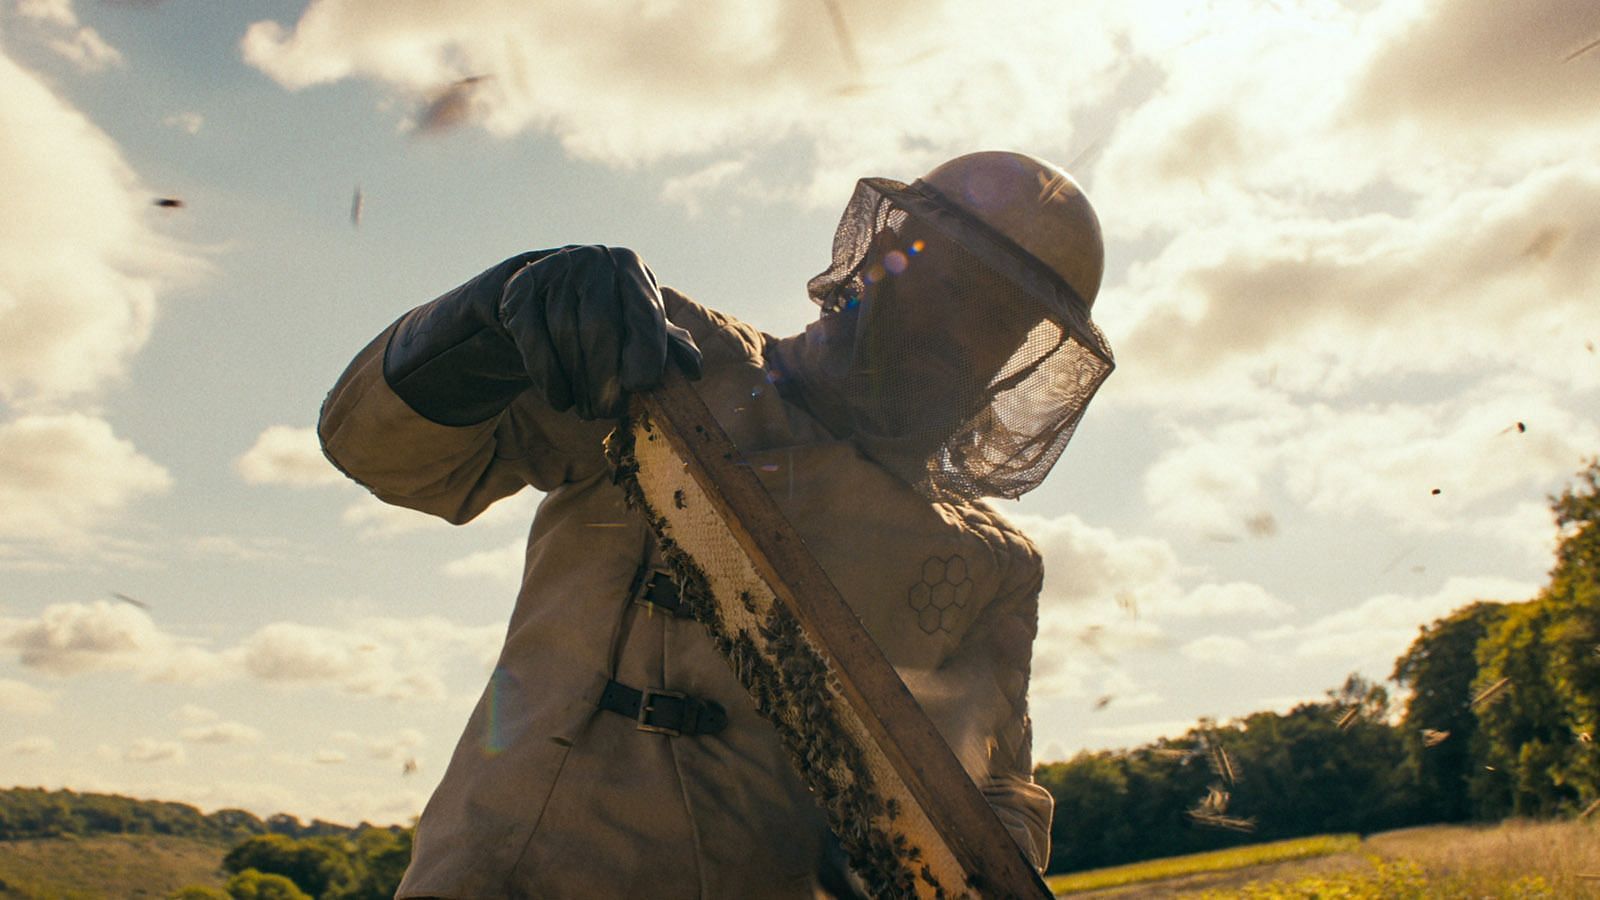 A still from The Beekeeper. (Photo via YouTube/Miramax)